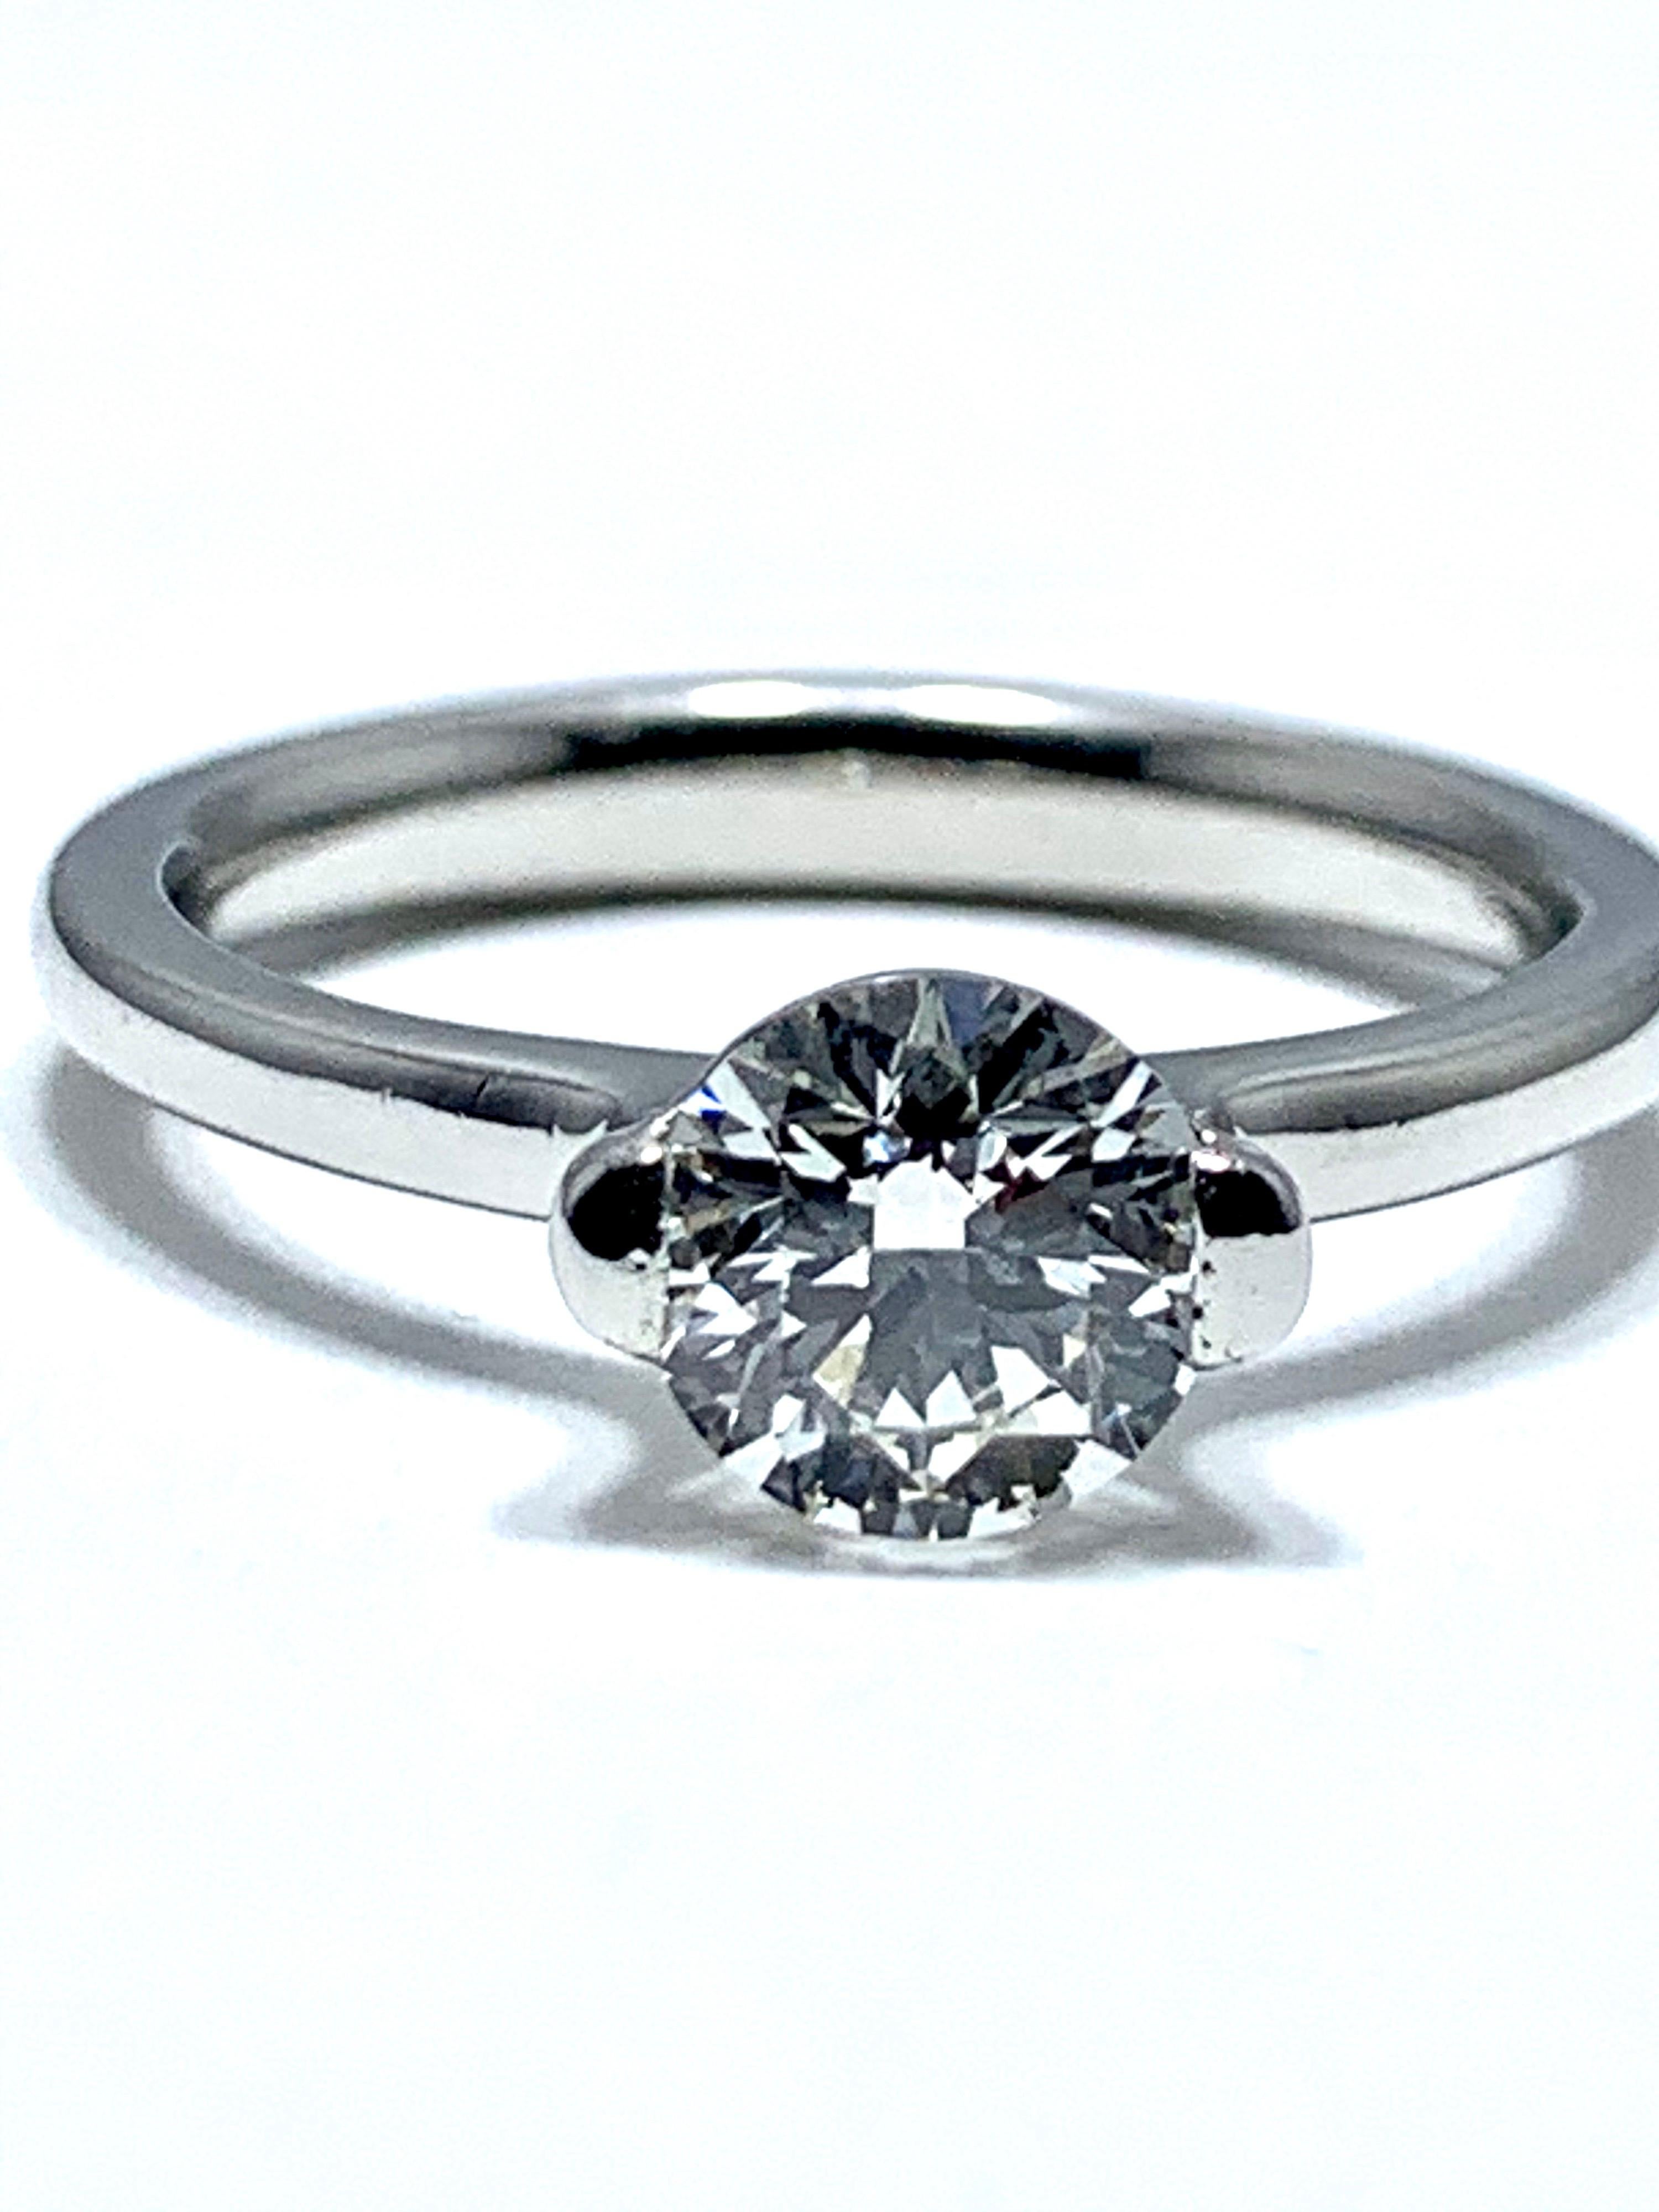 This diamond is fire!  A 0.84 carat Ideal cut round brilliant diamond solitaire in a platinum setting.  The diamond is set with two large prongs sitting above the polished shank of the ring.  The diamond is graded by AGS laboratories as ideal cut,